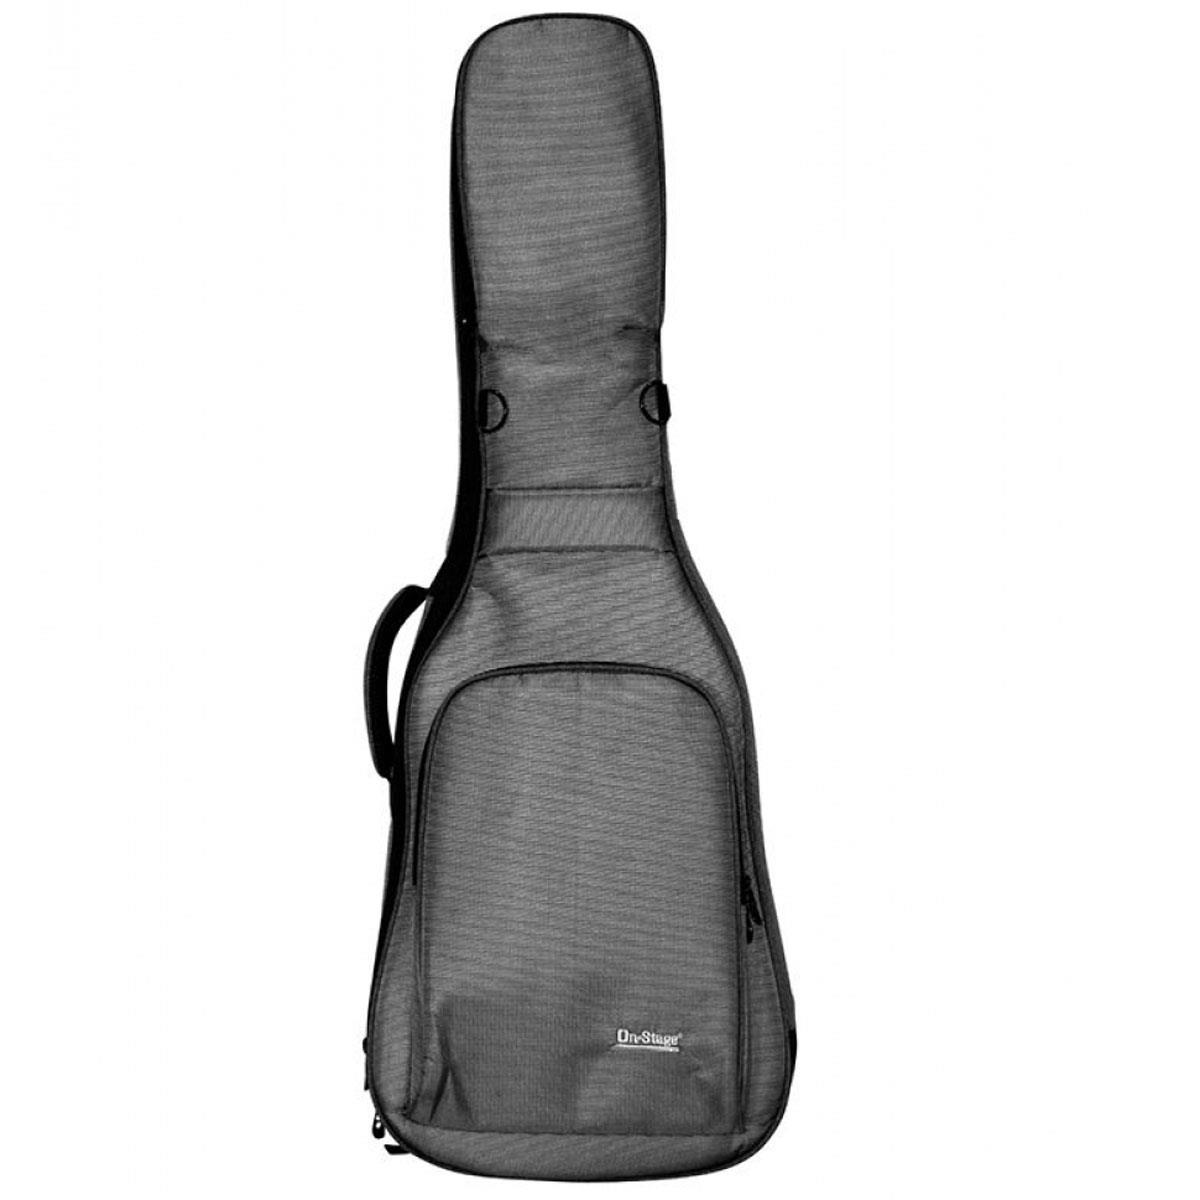 On-Stage GBE4990 Deluxe Electric Guitar Gig Bag, Charcoal Gray -  14577